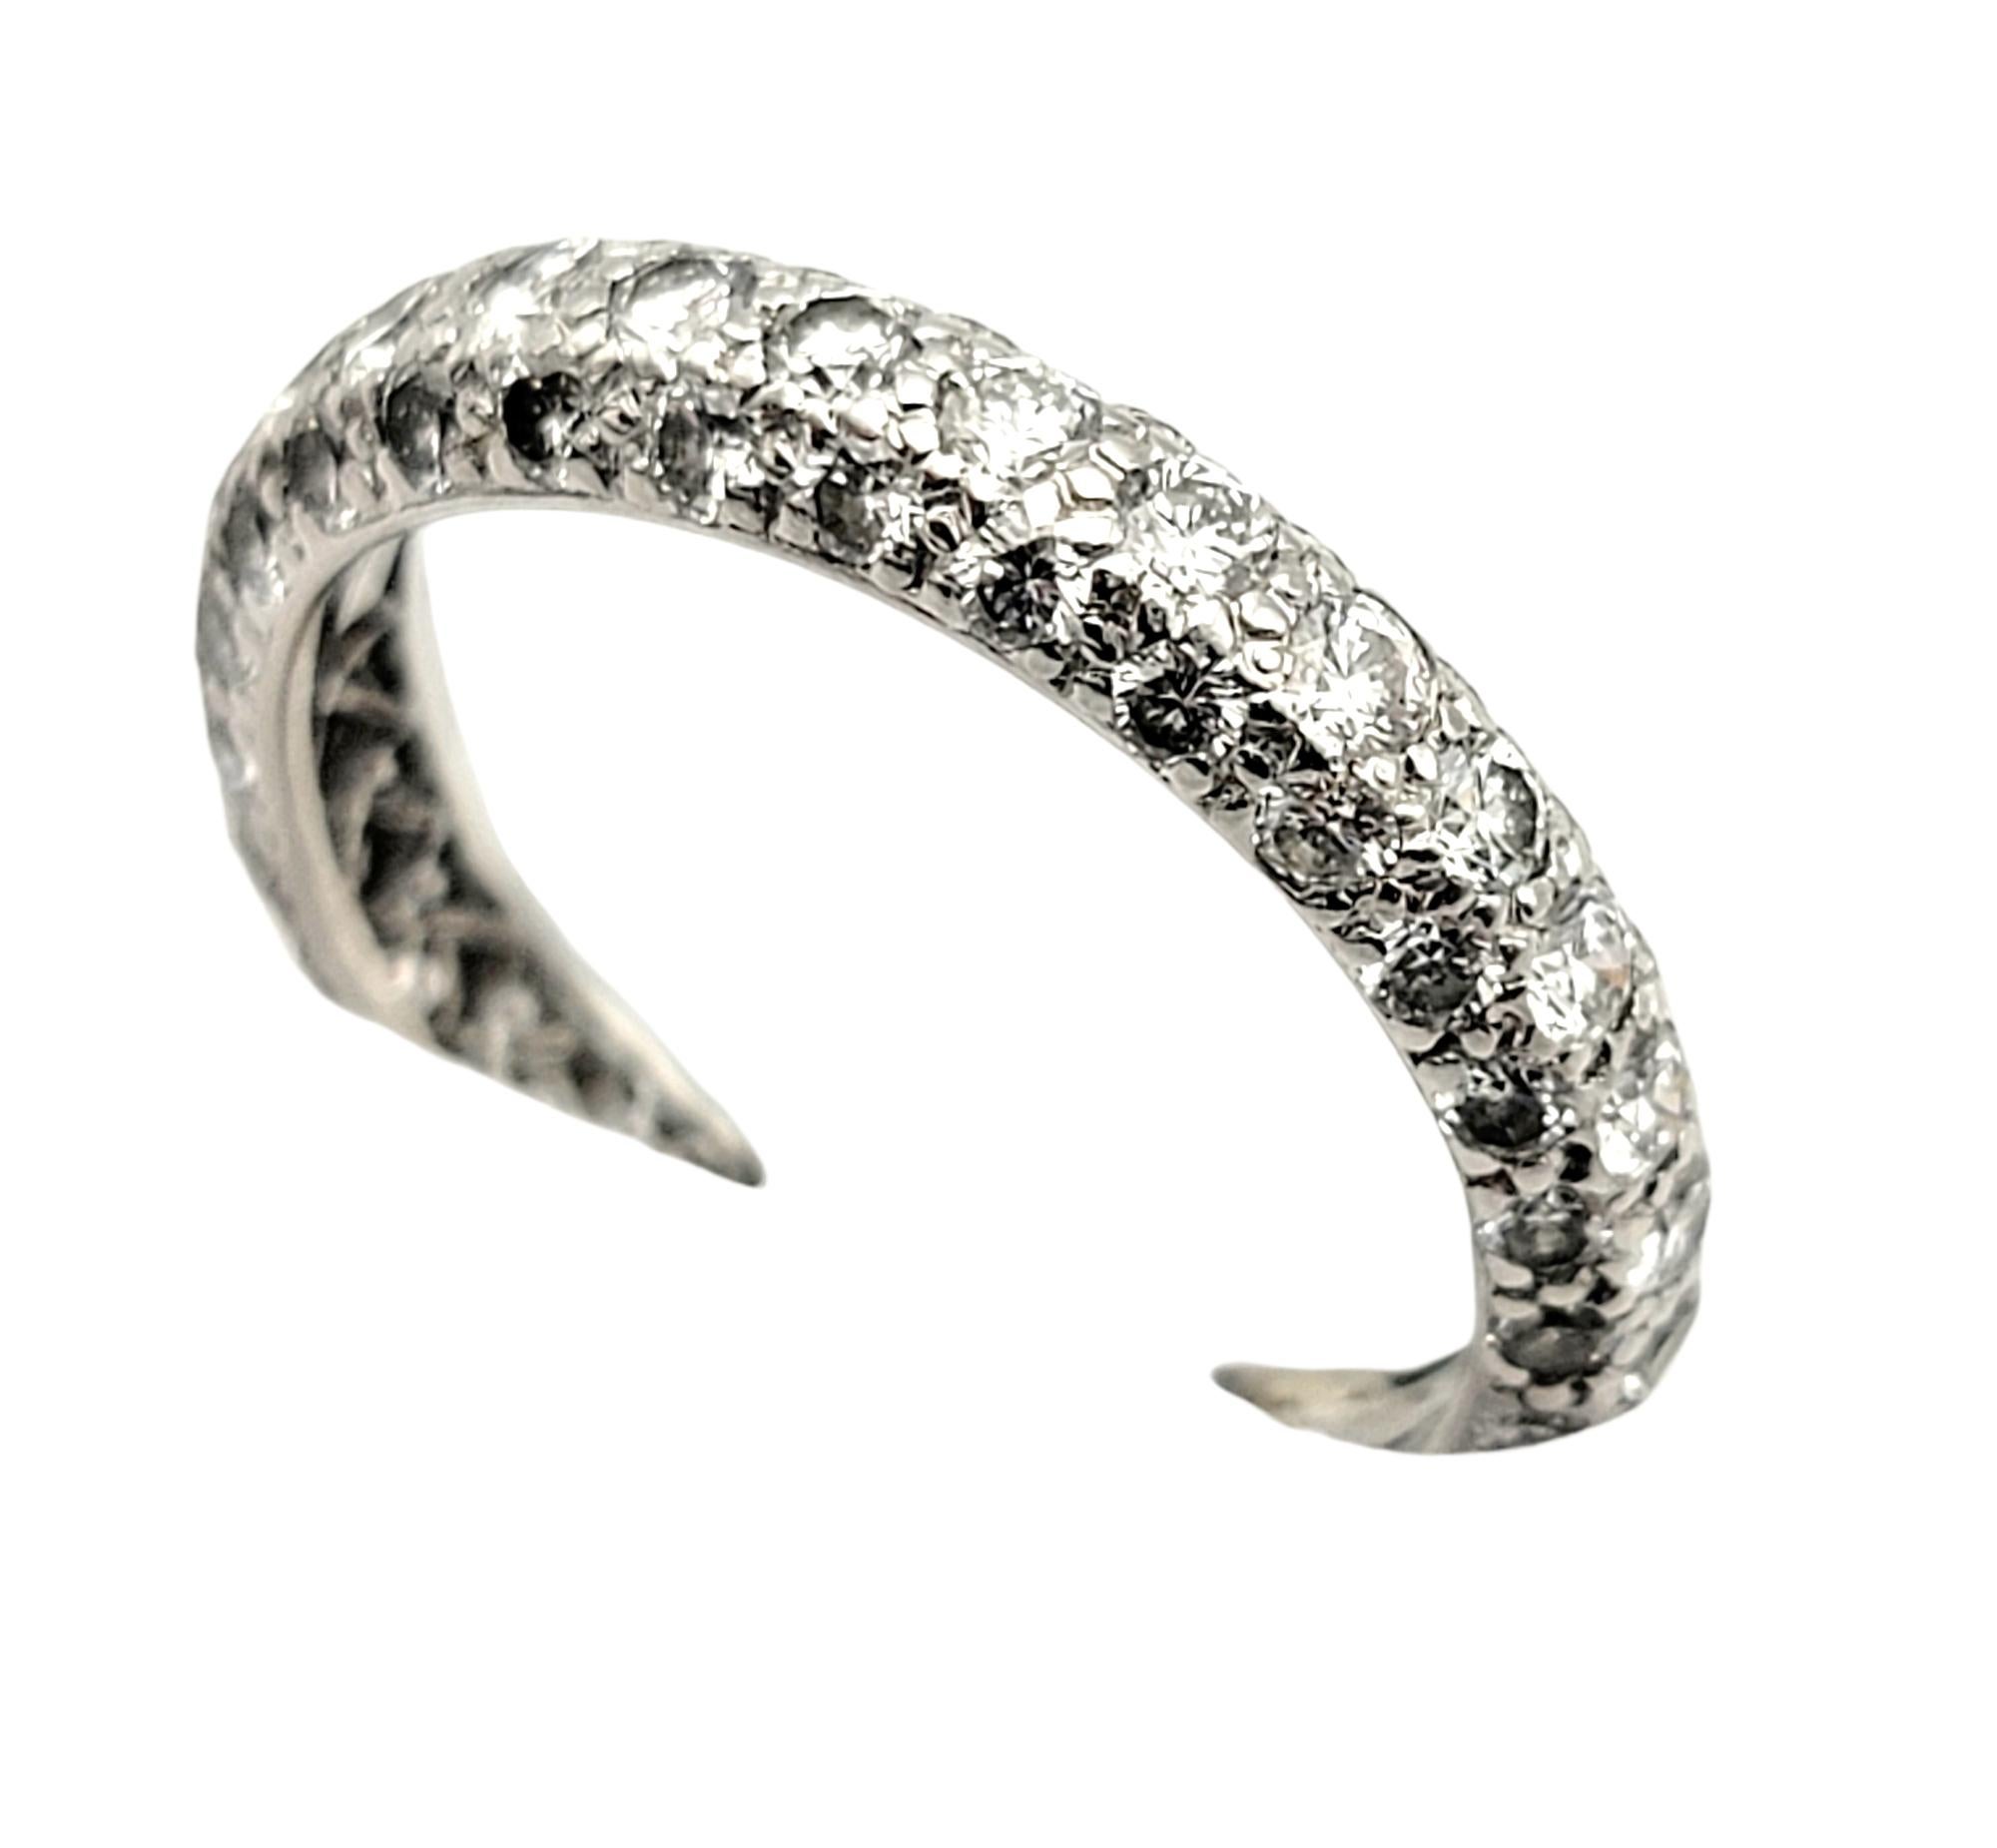 Contemporary Tiffany & Co. Etoile Pave Diamond Eternity Band Ring Platinum 1.76 Carats Total